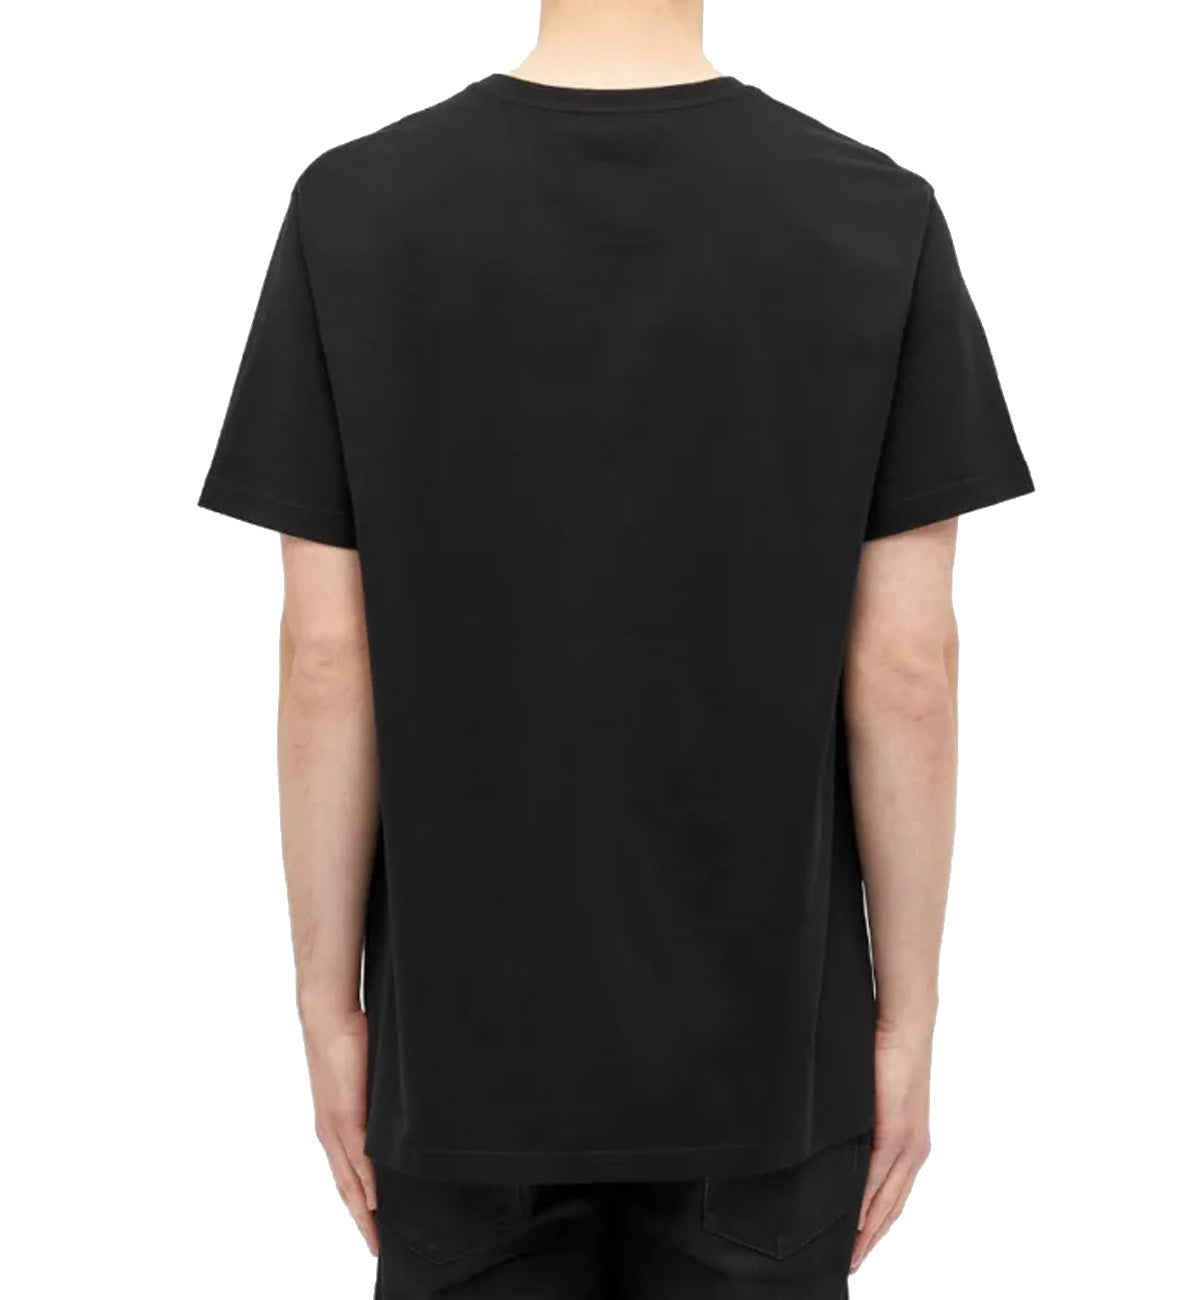 Givenchy Studio Homme Floral Printed T-Shirt (Black)